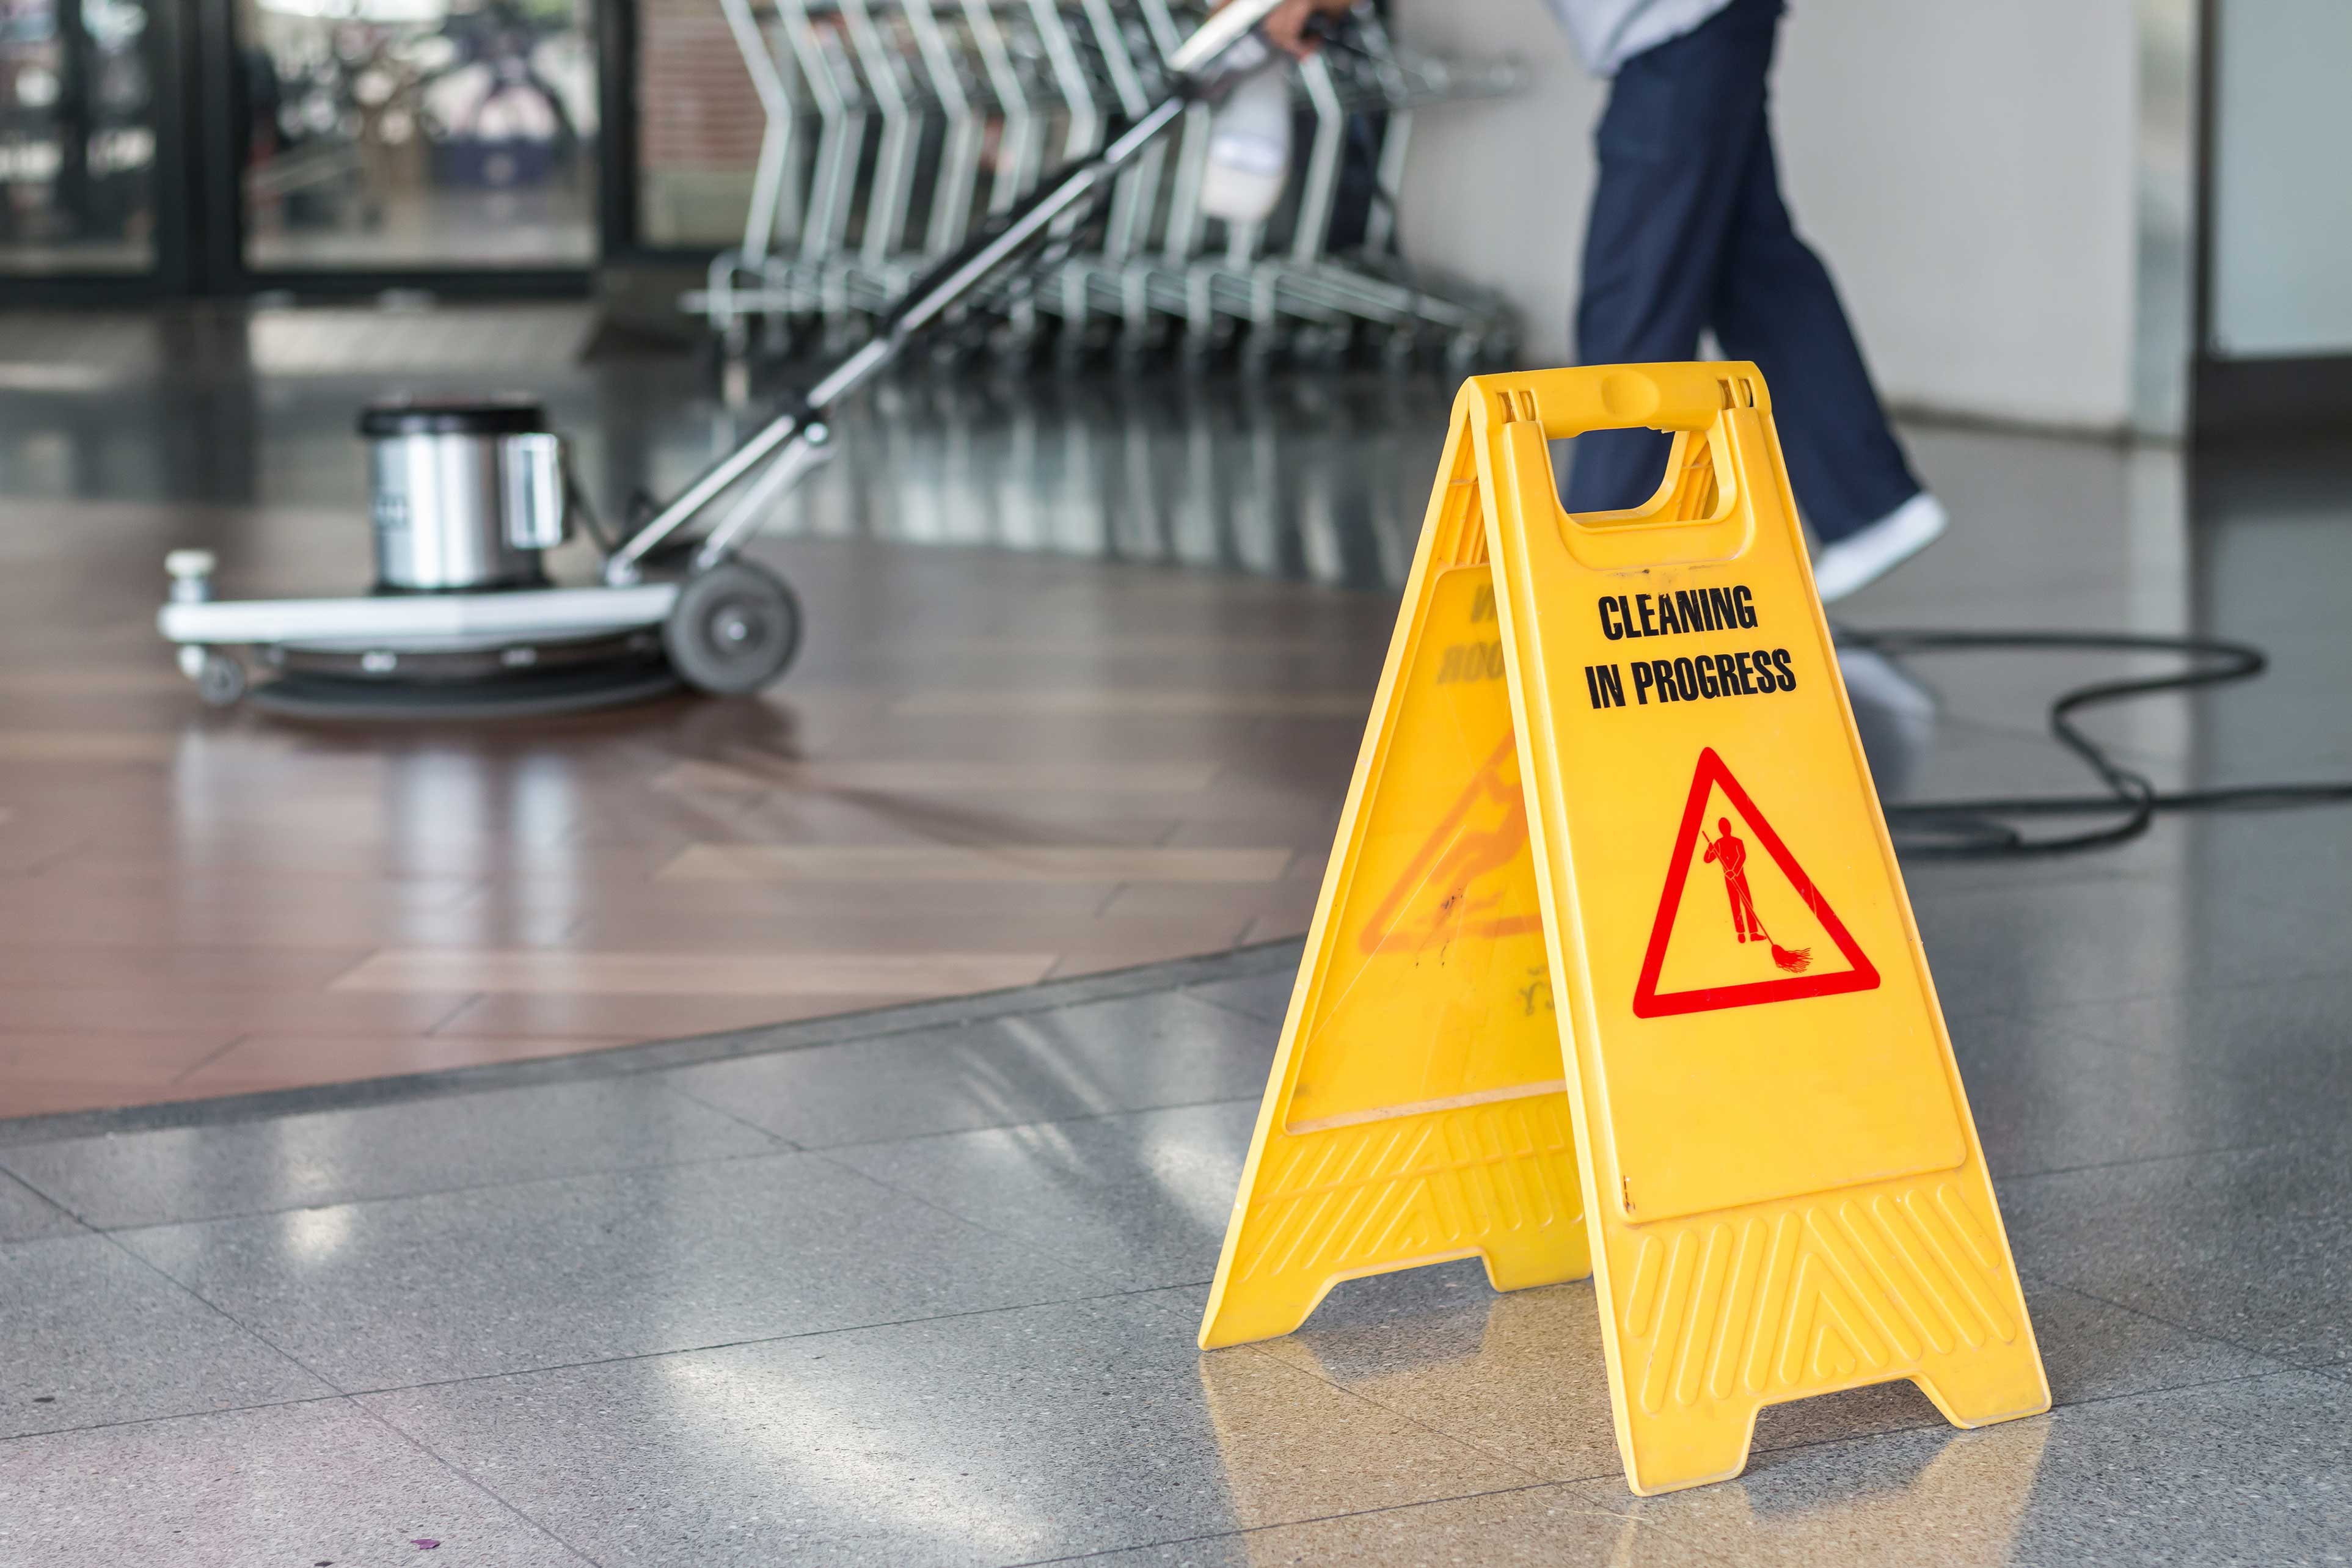 How To Use An Auto Scrubber To Clean Your Commercial Hard Floors